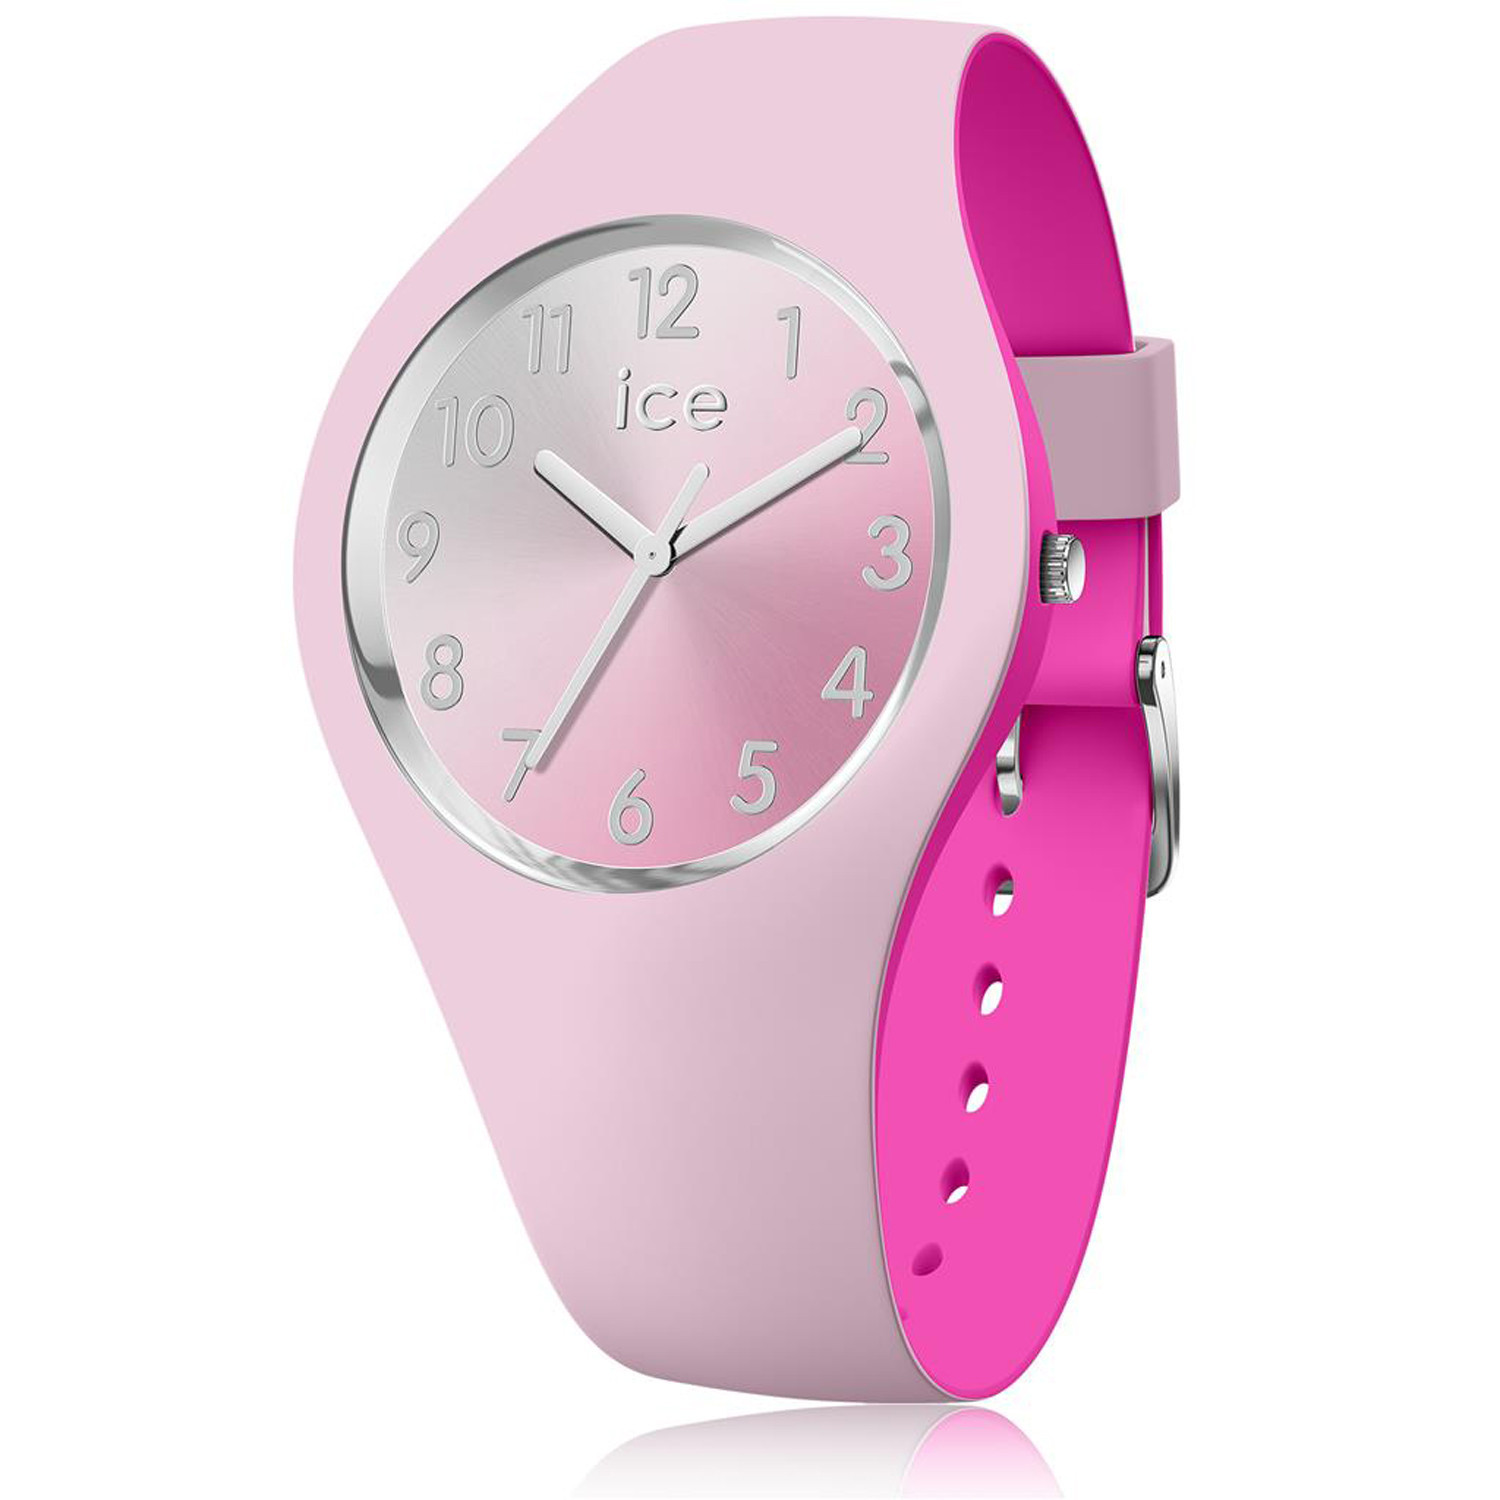 Montre Ice Watch femme Ice Duo Chic Pink Silver
Small